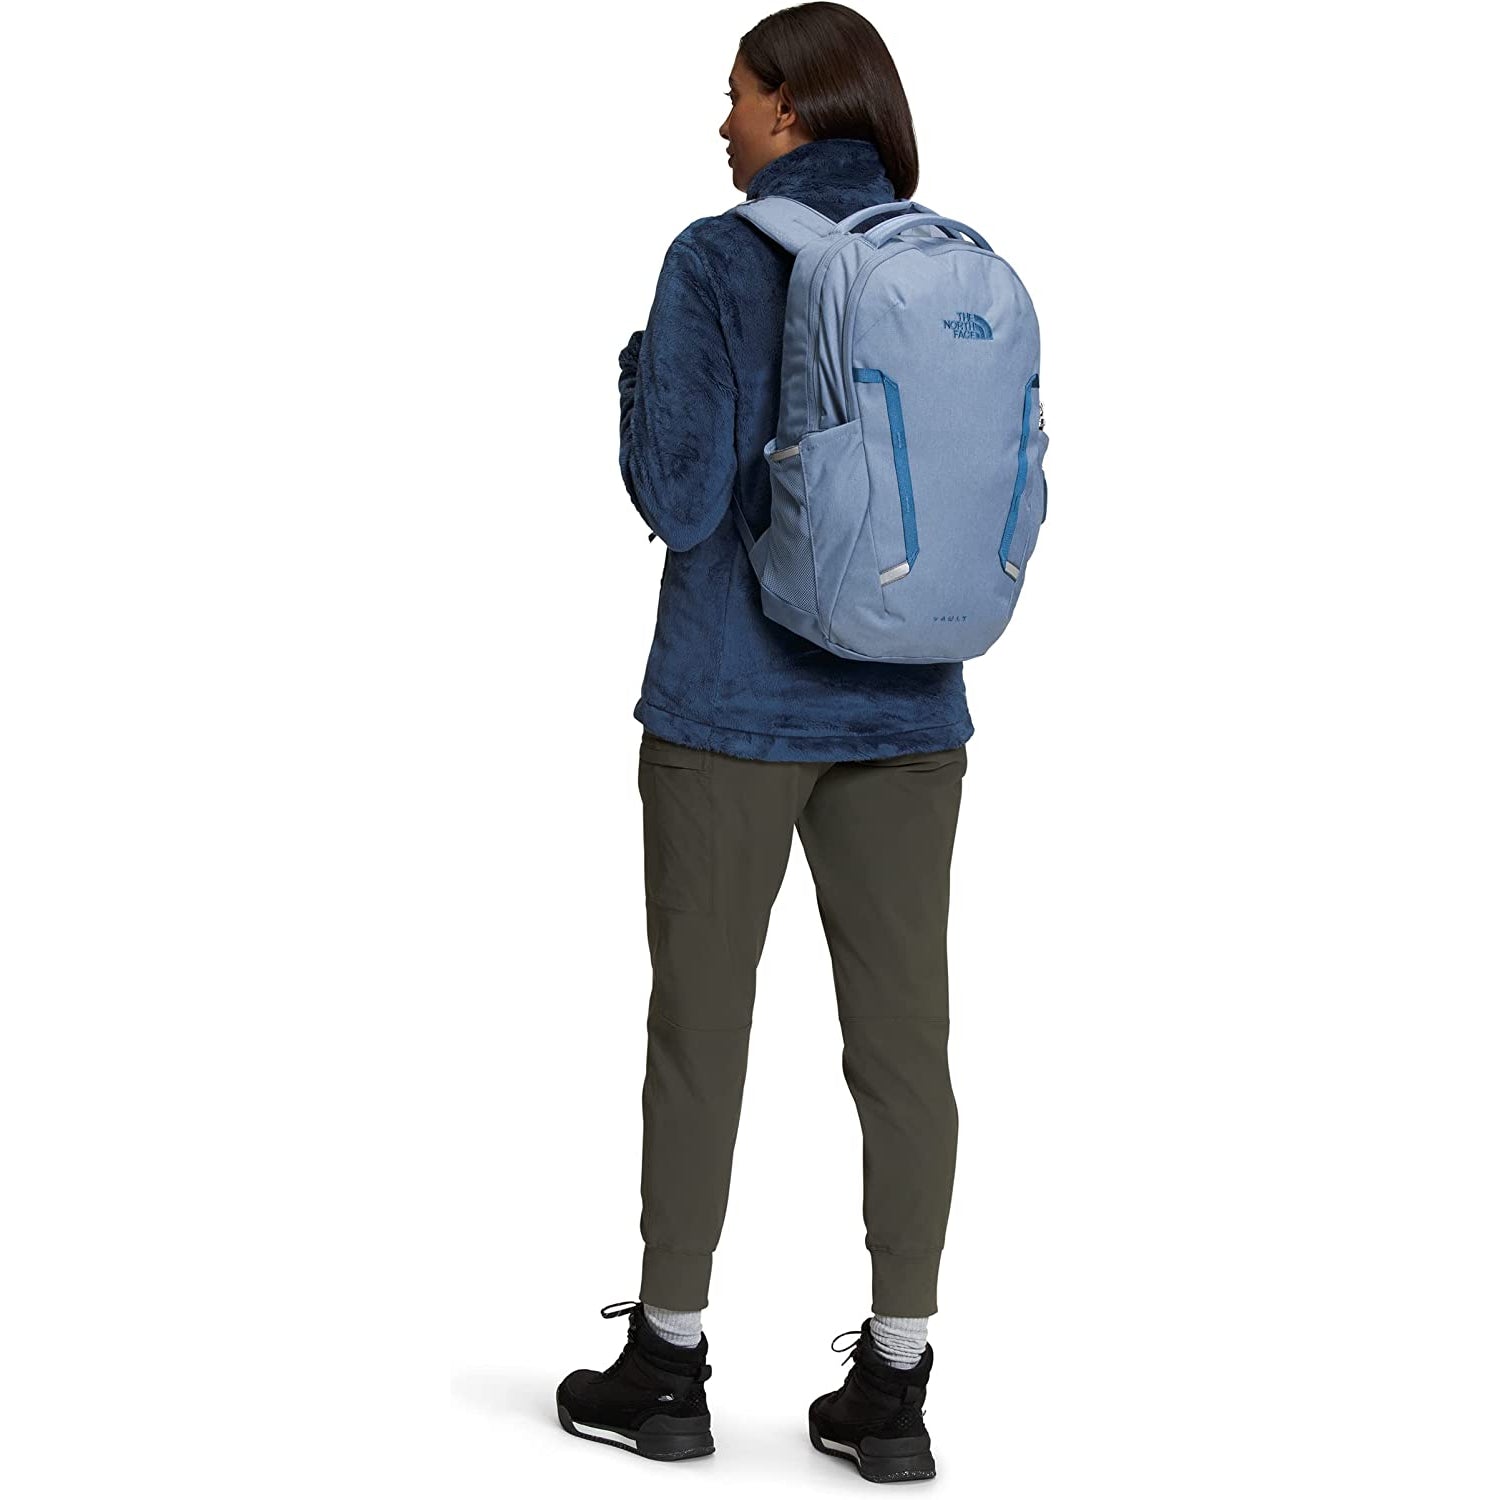 The North Face Womens Vault Backpack